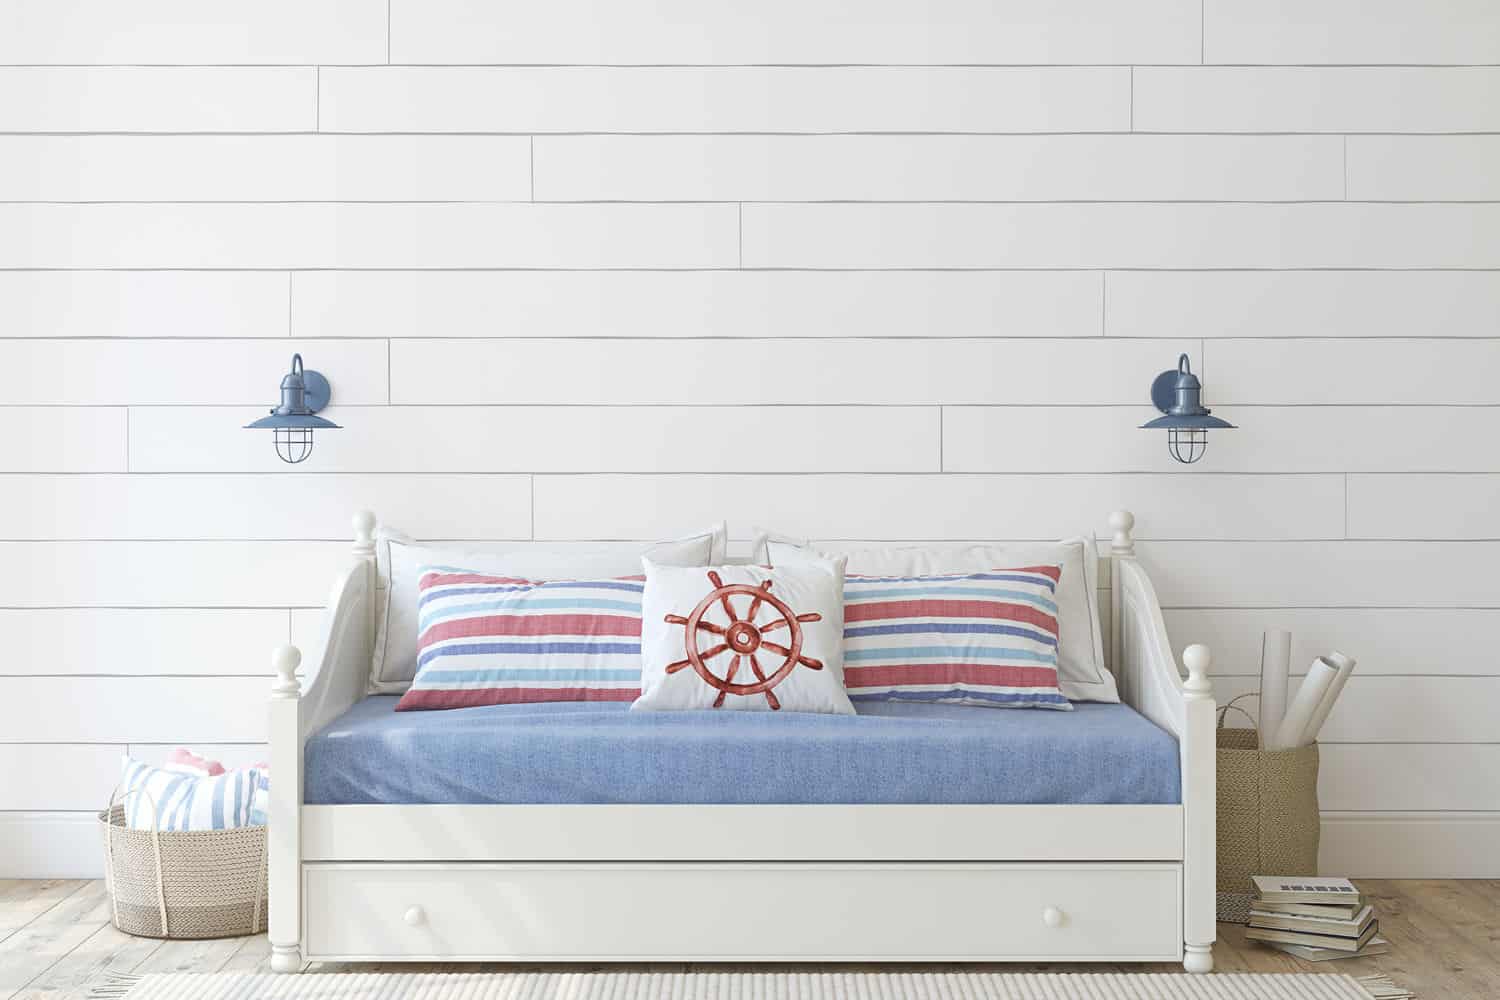 White Daybed with Cushions and Sky Blue Cover